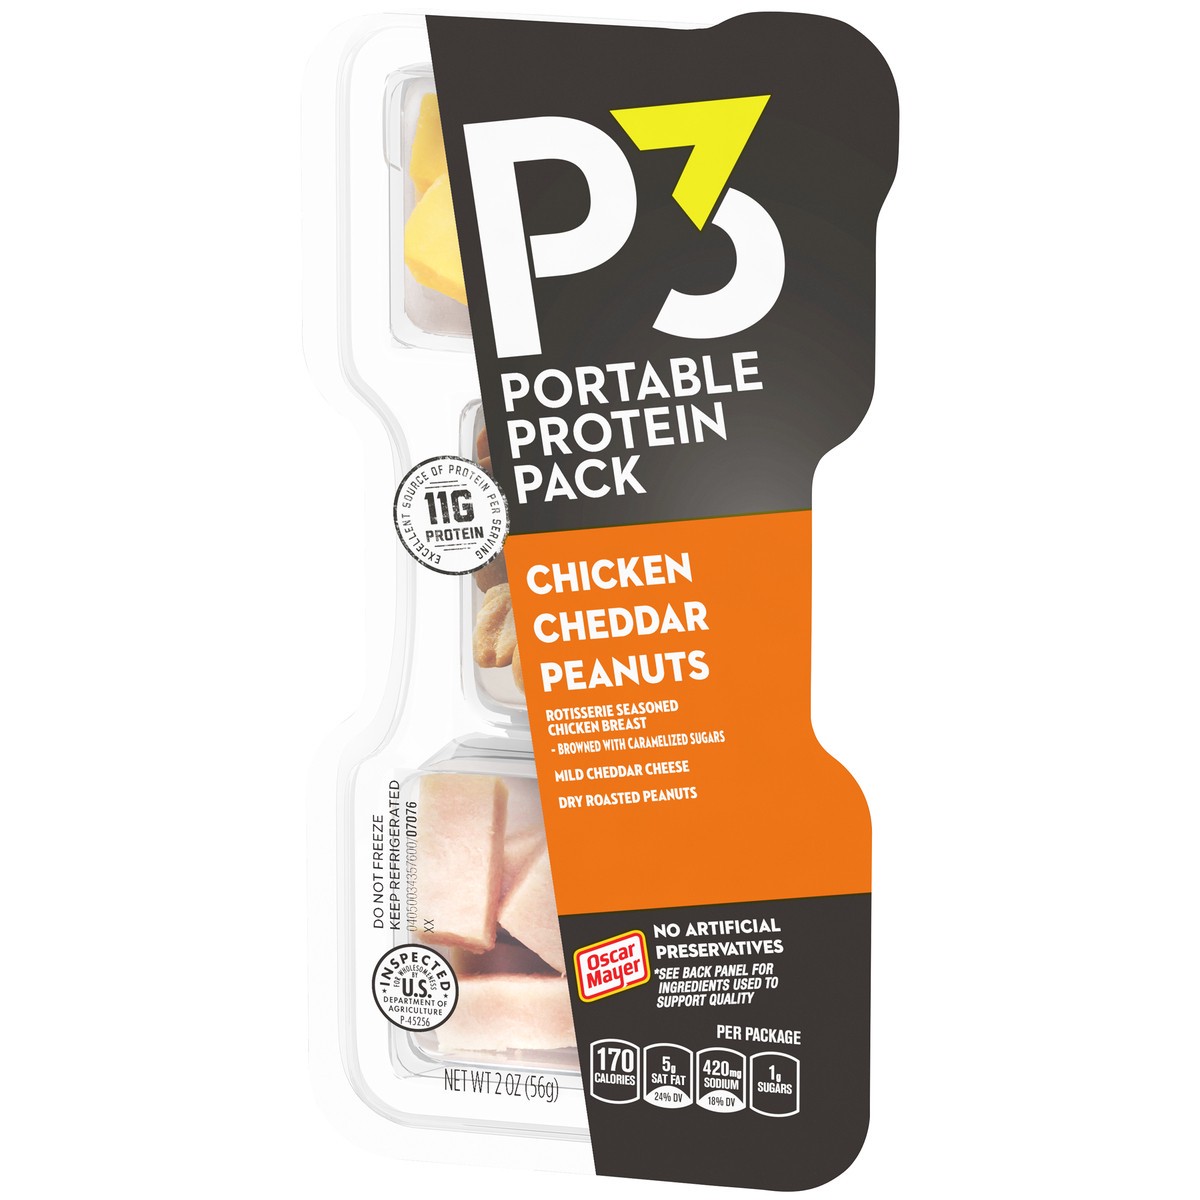 slide 2 of 9, P3 Portable Protein Snack Pack with Chicken, Peanuts & Cheddar Cheese, 2 oz Tray, 2 oz